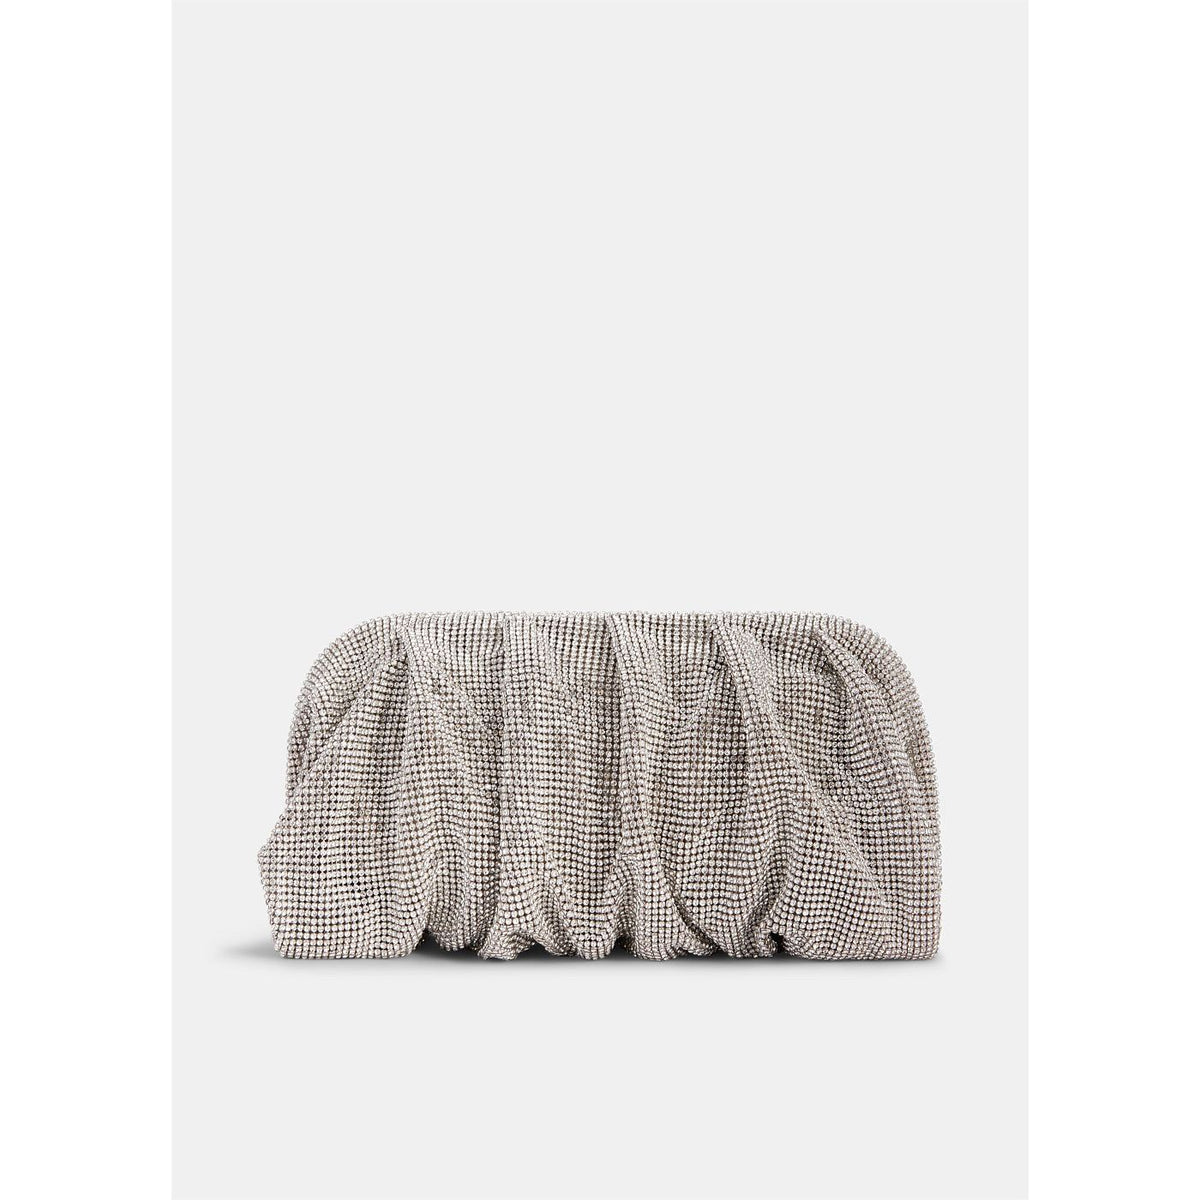 Silver Crystal Slouch Clutch